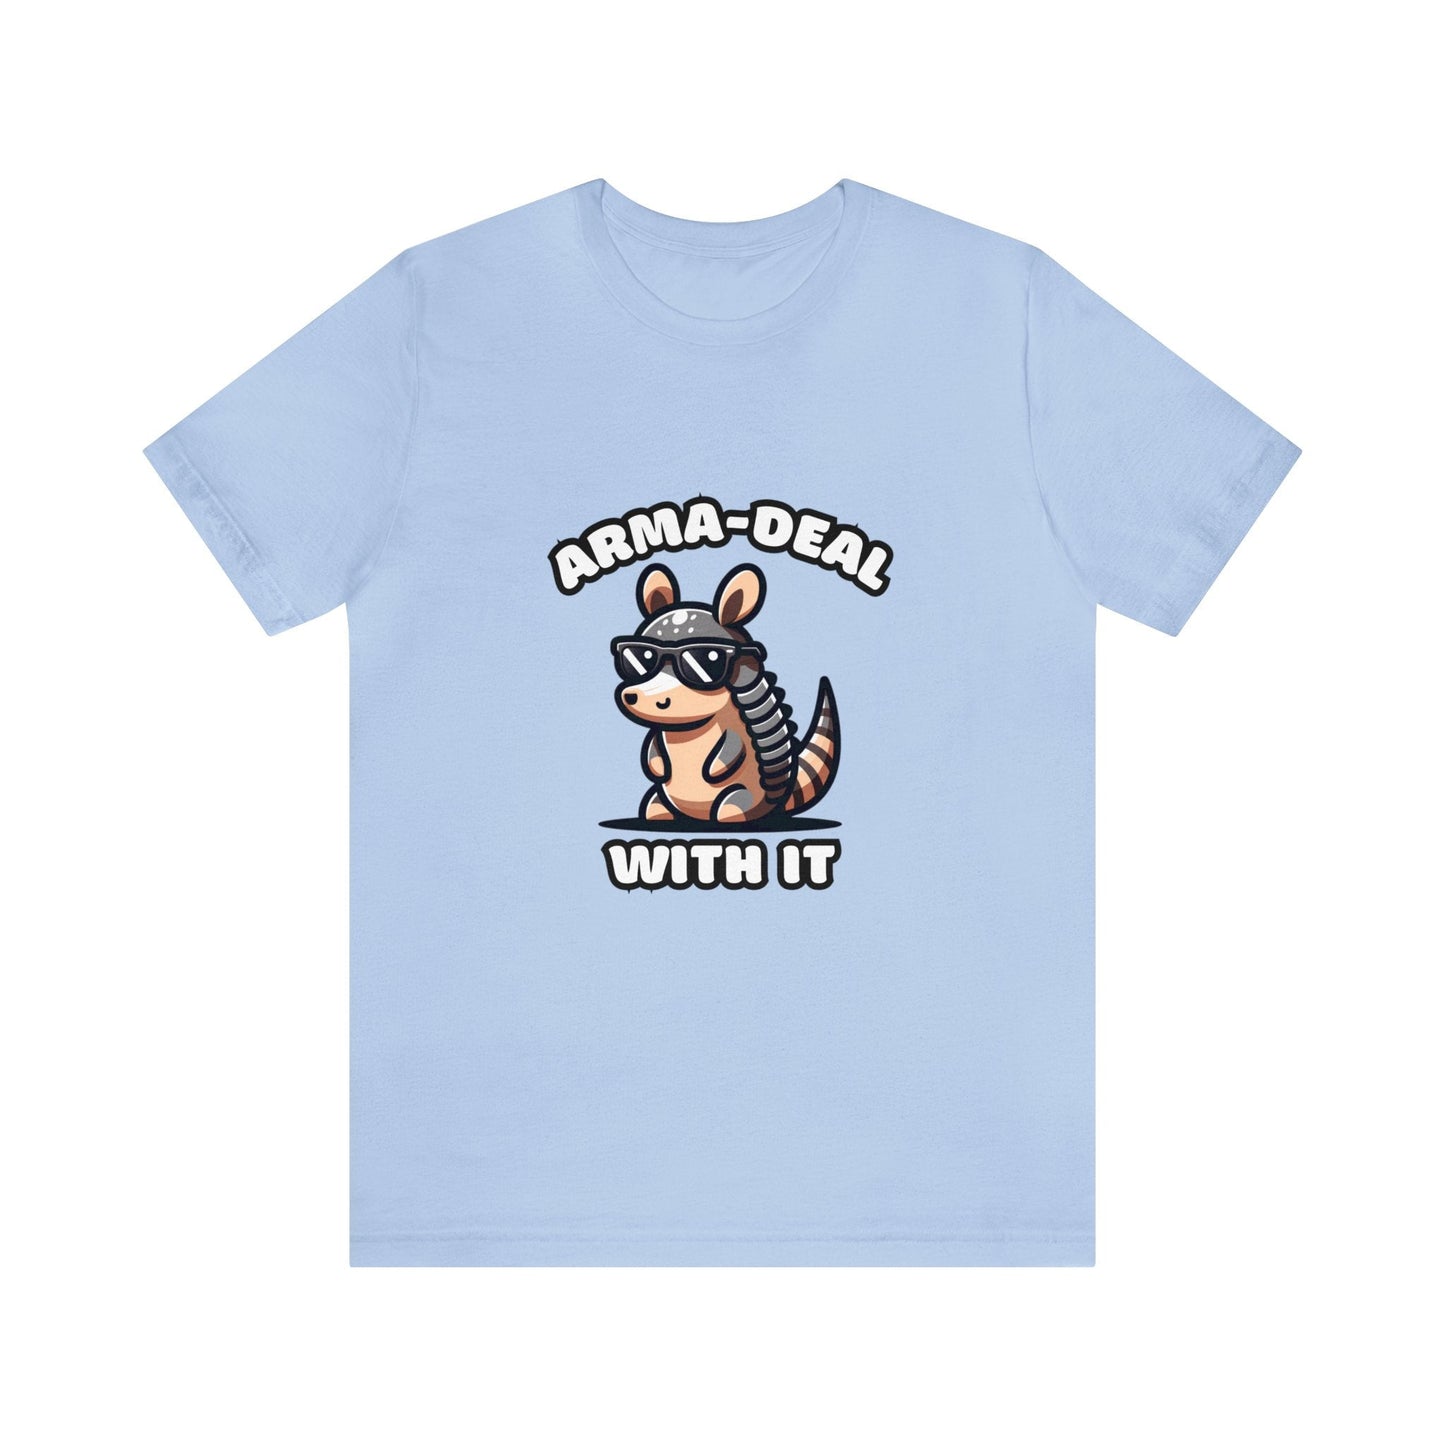 Arma-Deal With It - Armadillo T-shirt Baby Blue / S